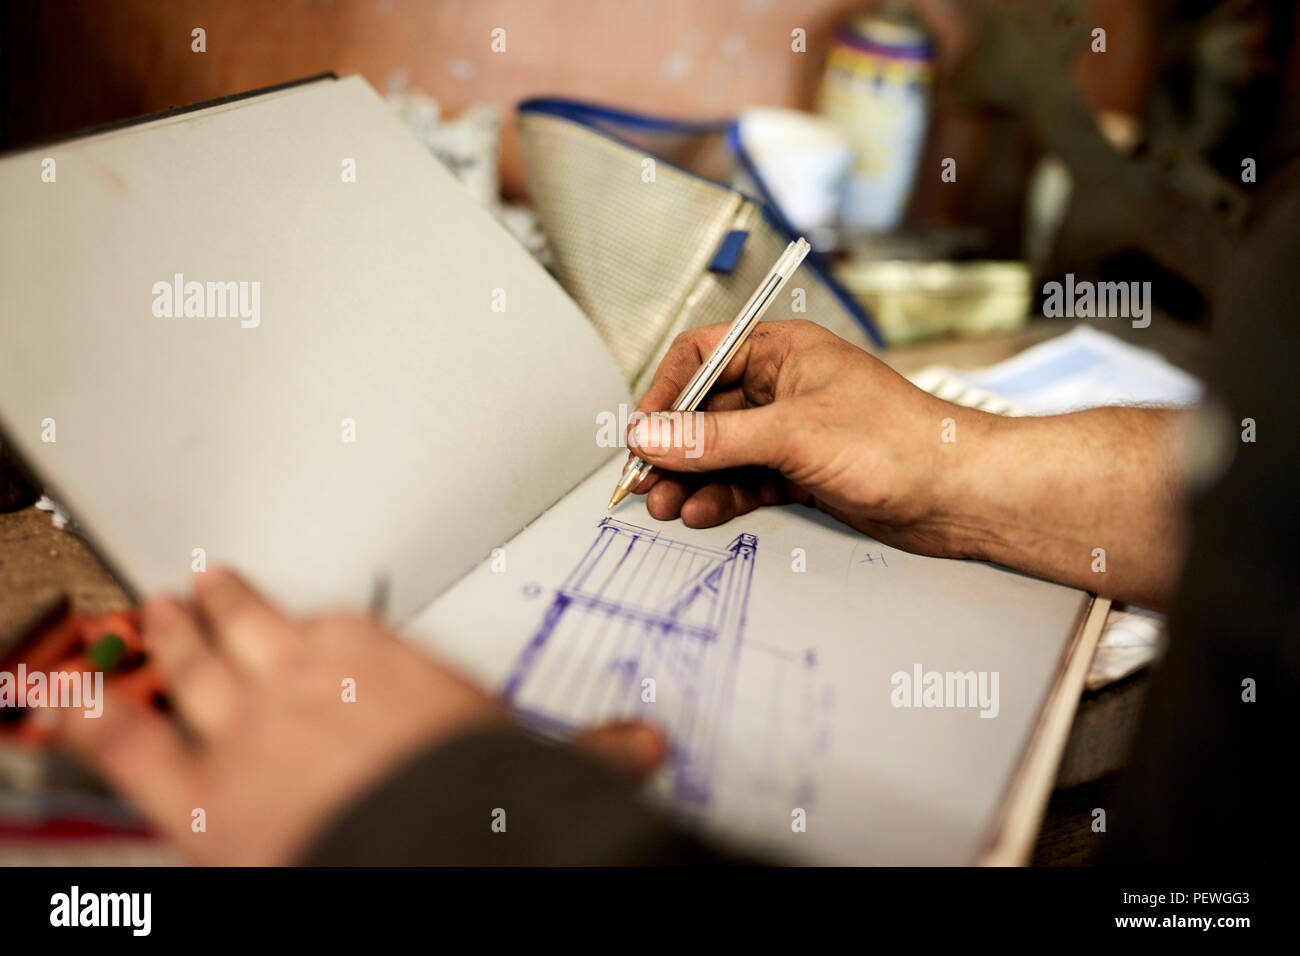 An artisan metal worker drawing up designs for a gate in a sketchbook Stock Photo